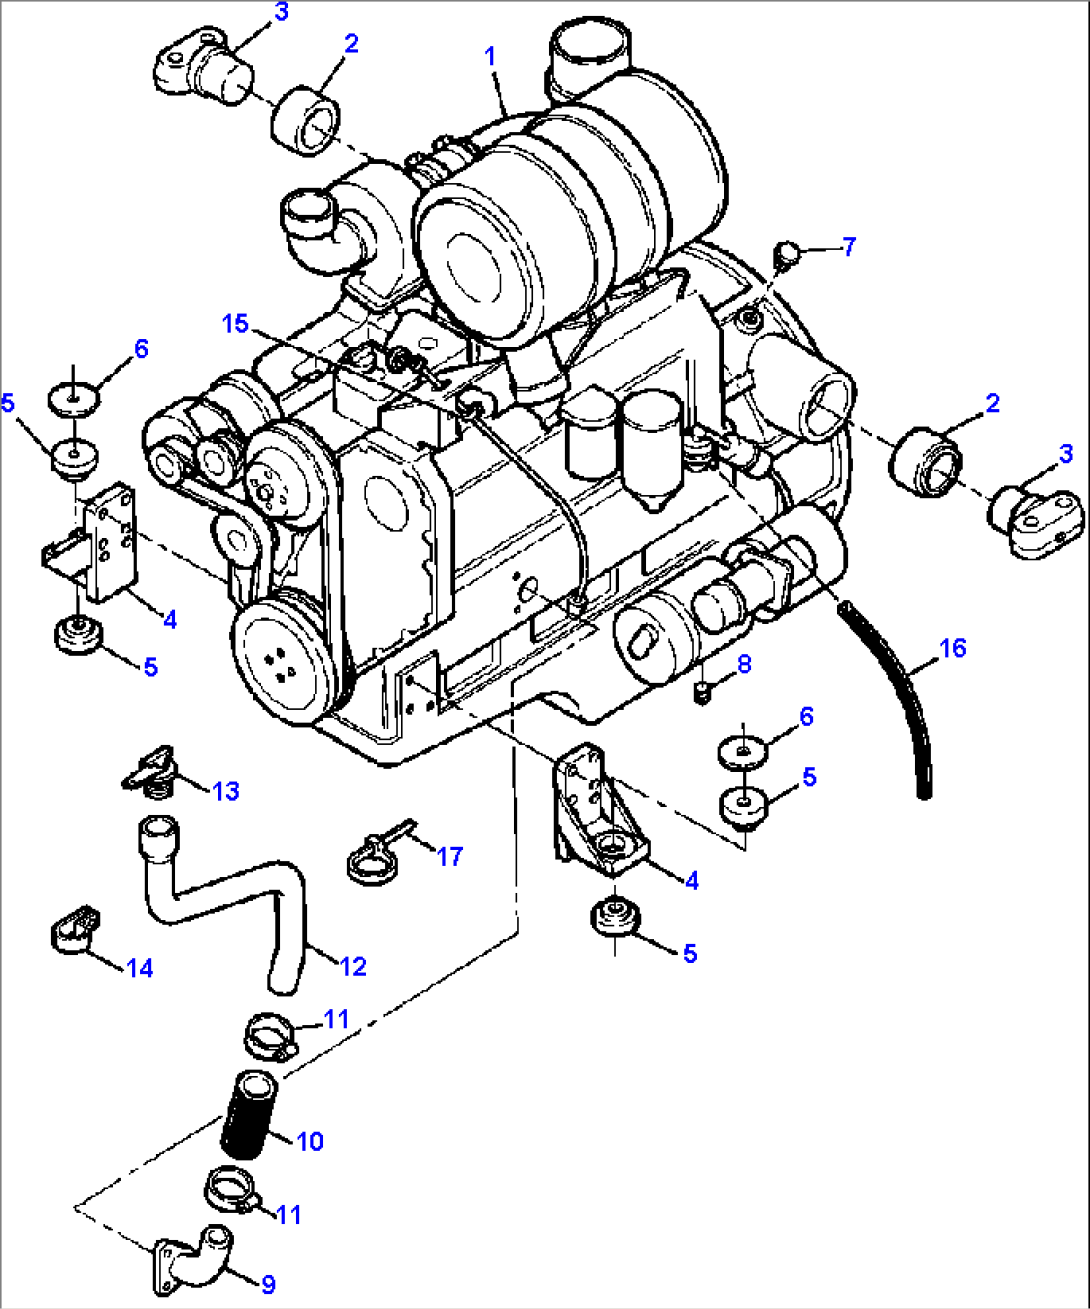 ENGINE AND MOUNTING